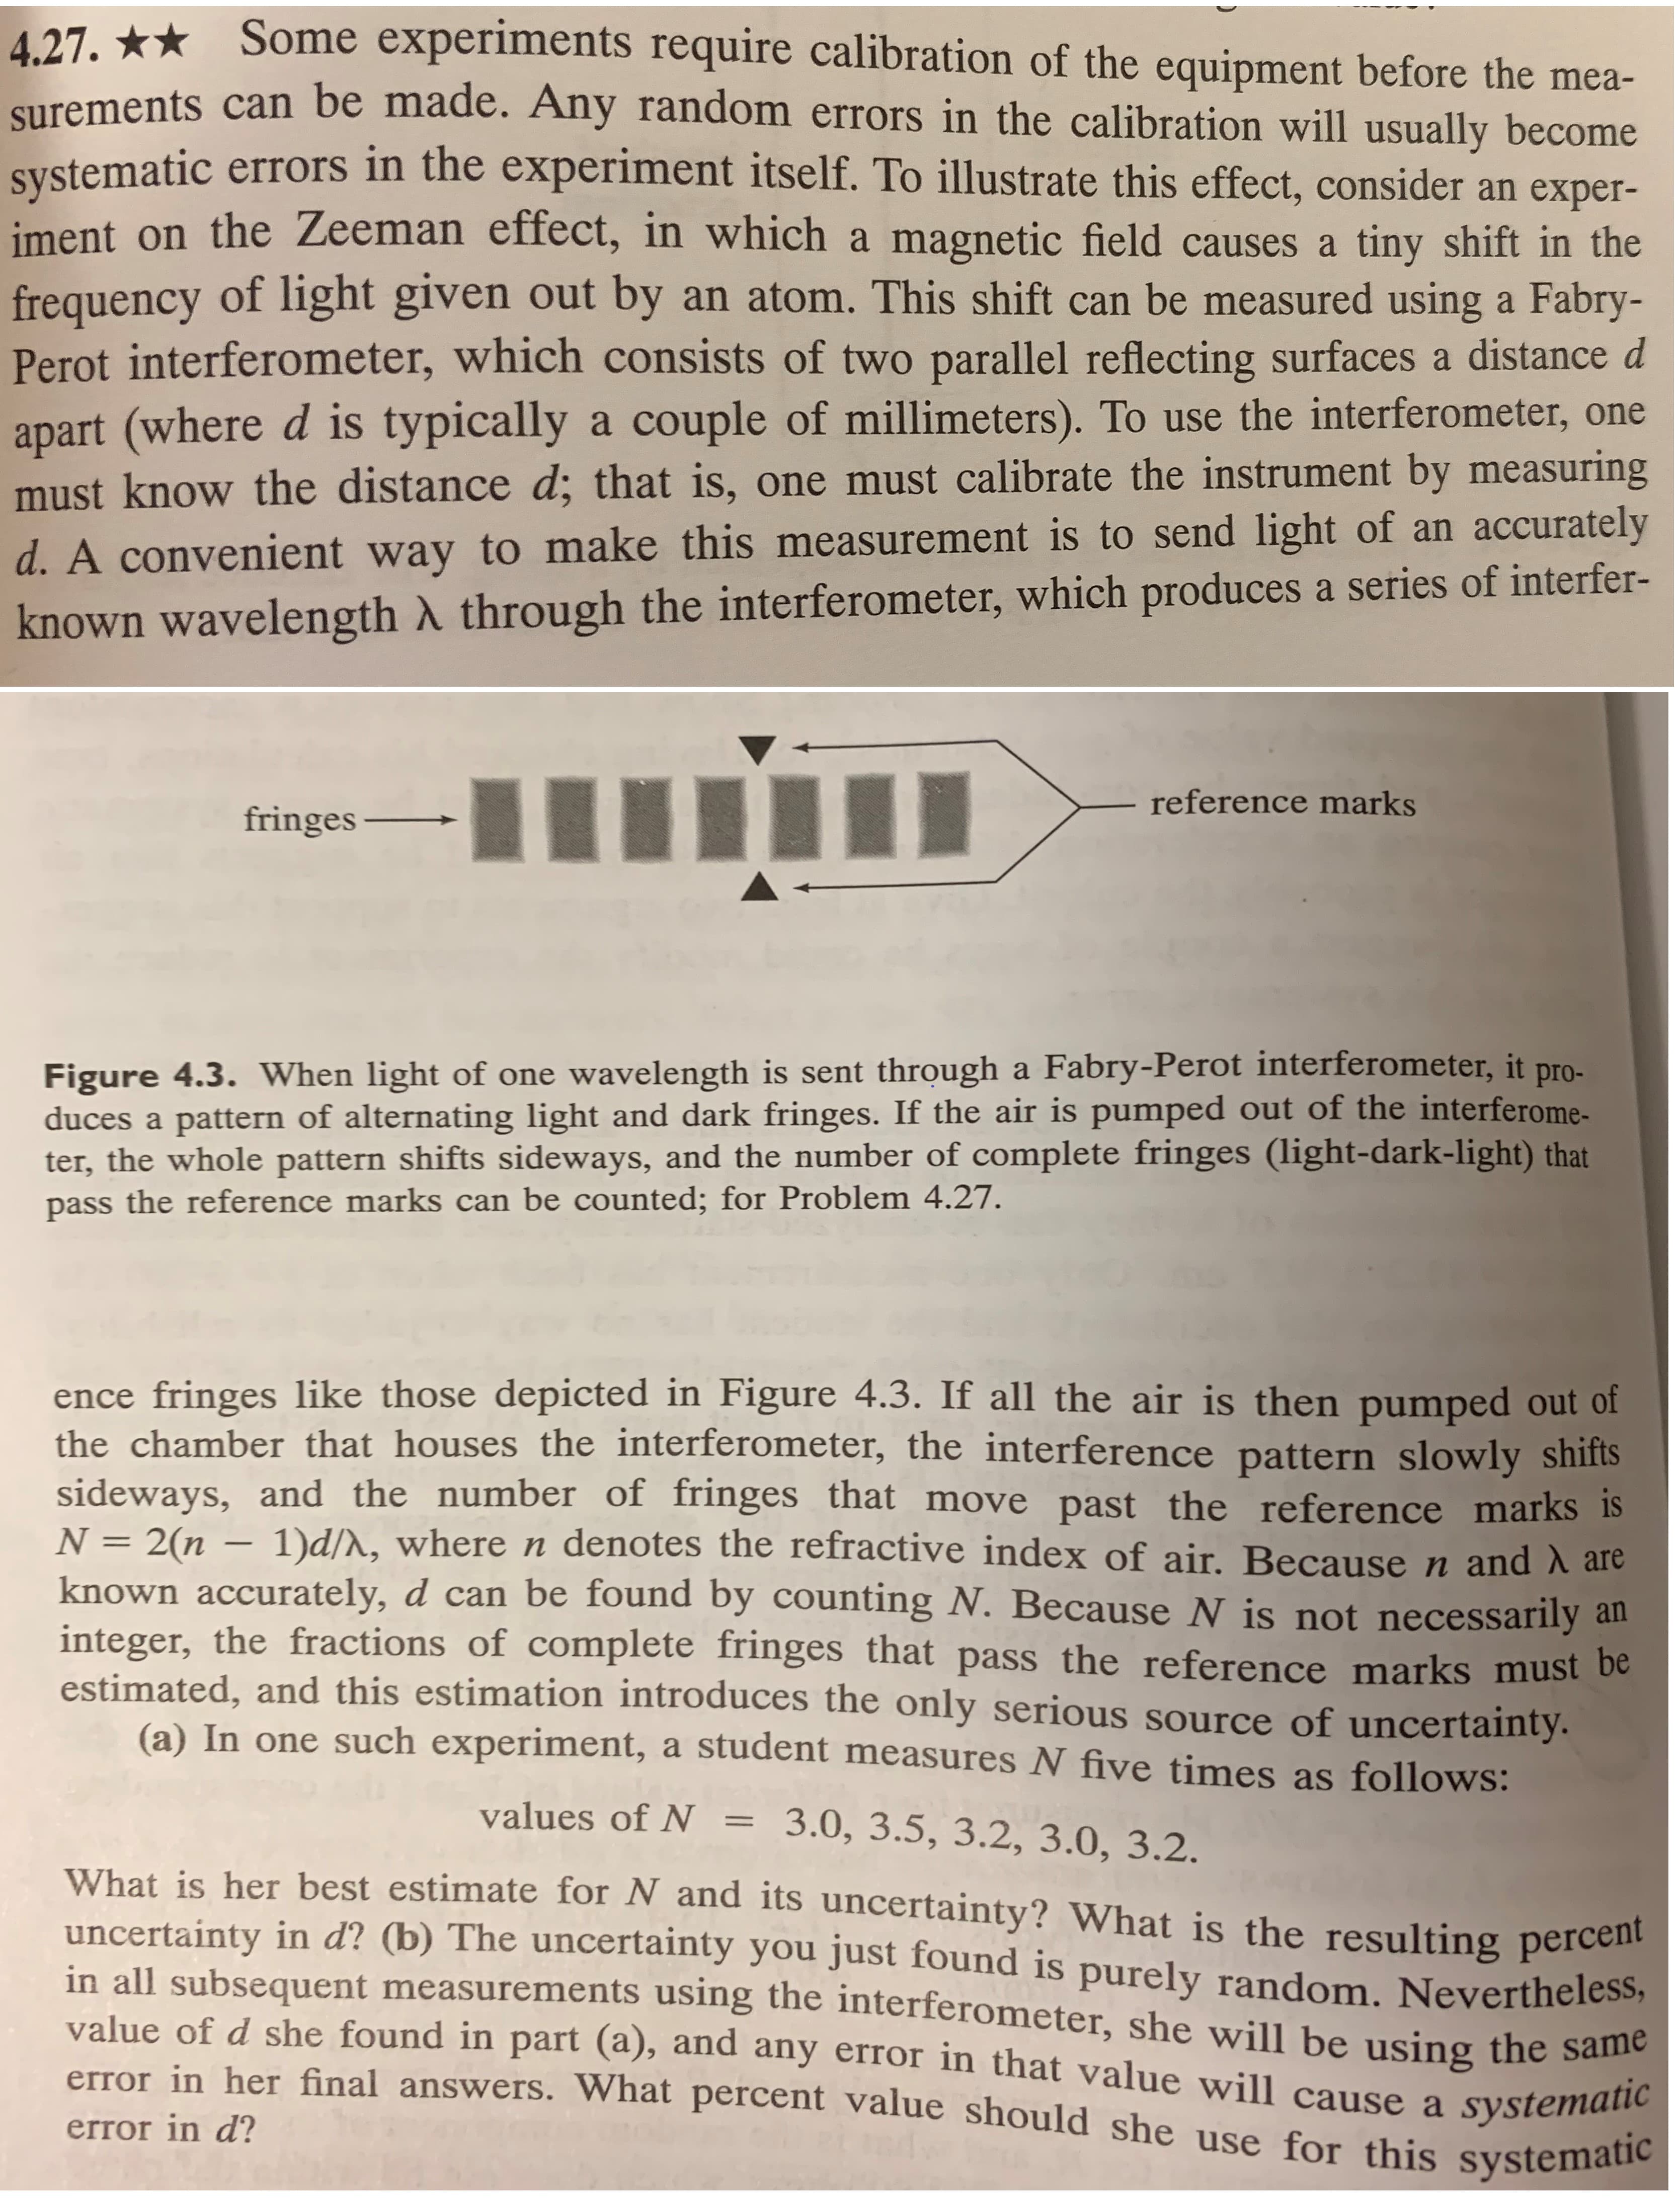 Some experiments require calibration of the equipment before the mea-
surements can be made. Any random errors in the calibration will usually become
Systematic errors in the experiment itself. To illustrate this effect, consider an exper-
iment on the Zeeman effect, in which a magnetic field causes a tiny shift in the
4.27.
frequency of light given out by an atom. This shift can be measured using a Fabry-
Perot interferometer, which consists of two parallel reflecting surfaces a distance d
apart (where d is typically a couple of millimeters). To use the interferometer, one
must know the distance d; that is, one must calibrate the instrument by measuring
d. A convenient way to make this measurement is to send light of an accurately
known wavelength A through the interferometer, which produces a series of interfer-
reference marks
fringes
wavelength is sent through a Fabry-Perot interferometer, it pro-
Figure 4.3. When light of one
duces a pattern of alternating light and dark fringes. If the air is pumped out of the interferome-
ter, the whole pattern shifts sideways, and the number of complete fringes (light-dark-light) that
pass the reference marks can be counted; for Problem 4.27.
ence fringes like those depicted in Figure 4.3. If all the air is then pumped out of
the chamber that houses the interferometer, the interference pattern slowly shifts
sideways, and the number of fringes that move past the reference marks is
1)d/A, where n denotes the refractive index of air. Because n and A are
known accurately, d can be found by counting N. Because N is not necessarily
N =2(n
an
integer, the fractions of complete fringes that pass the reference marks must be
estimated, and this estimation introduces the only serious source of uncertainty.
(a) In one such experiment, a student measures N five times as follows:
values of N = 3.0, 3.5, 3.2, 3.0, 3.2.
What is her best estimate for N and its uncertainty? What is the resulting percent
uncertainty in d? (b) The uncertainty you just found is purely random. Nevertheless,
in all subsequent measurements using the interferometer, she will be using the same
value of d she found in part (a), and any error in that value will cause a systematic
error in her final answers. What percent value should she use for this systematic
error in d?
